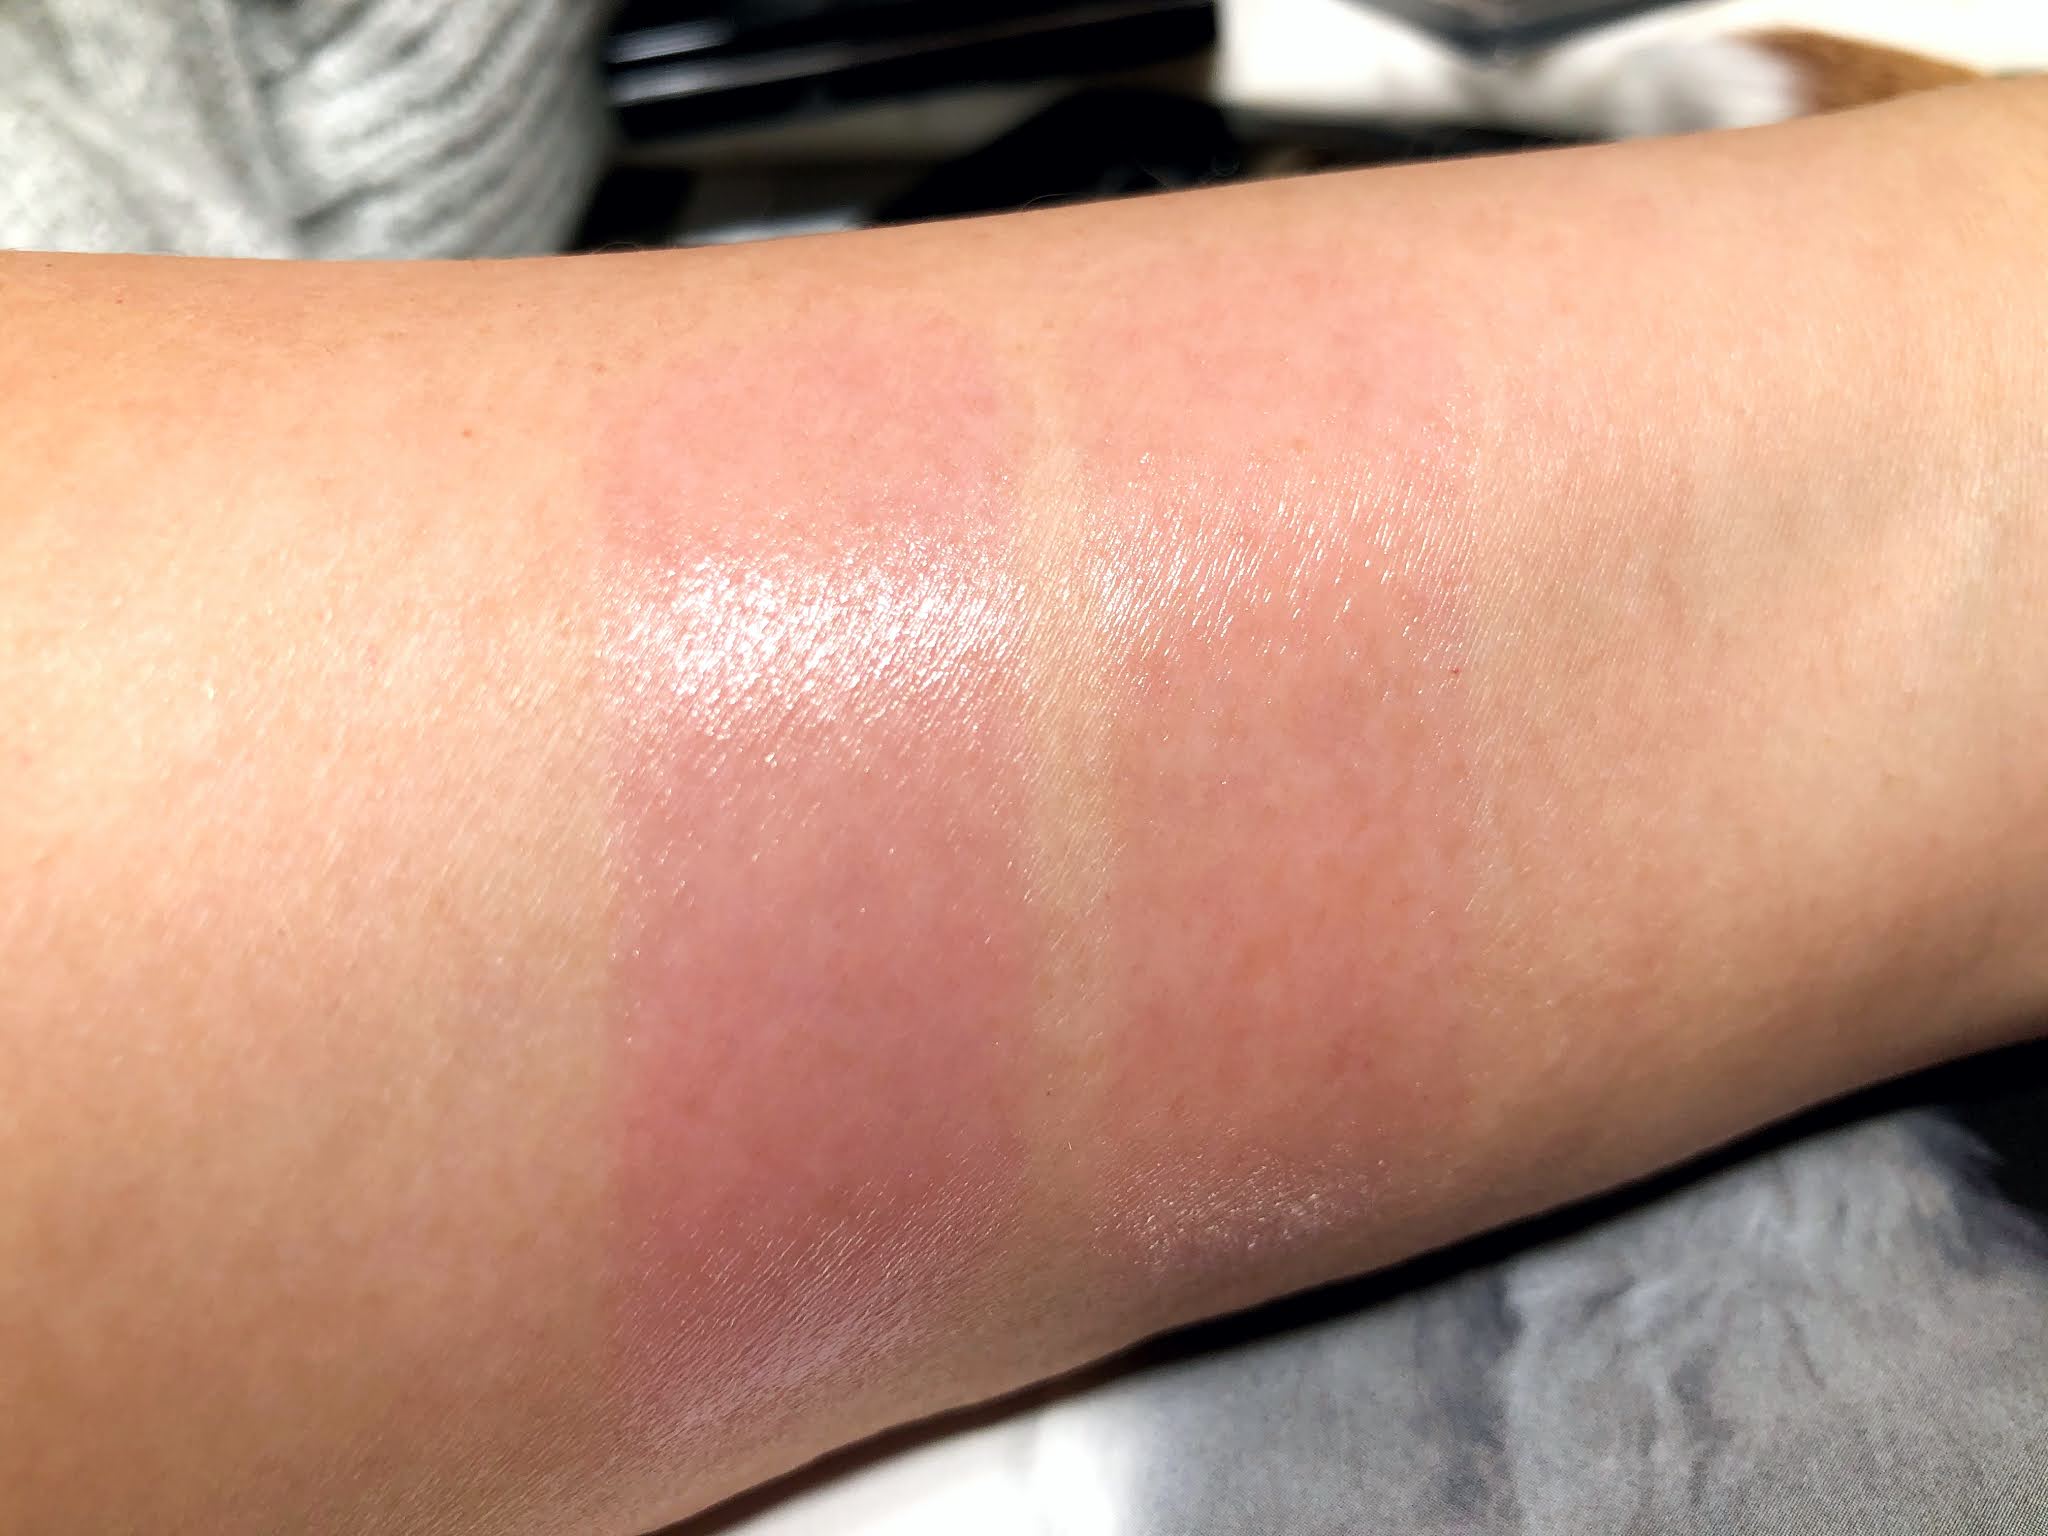 Dior DiorSkin Pure Glow Collection Stick Glow Blush Review and Swatches